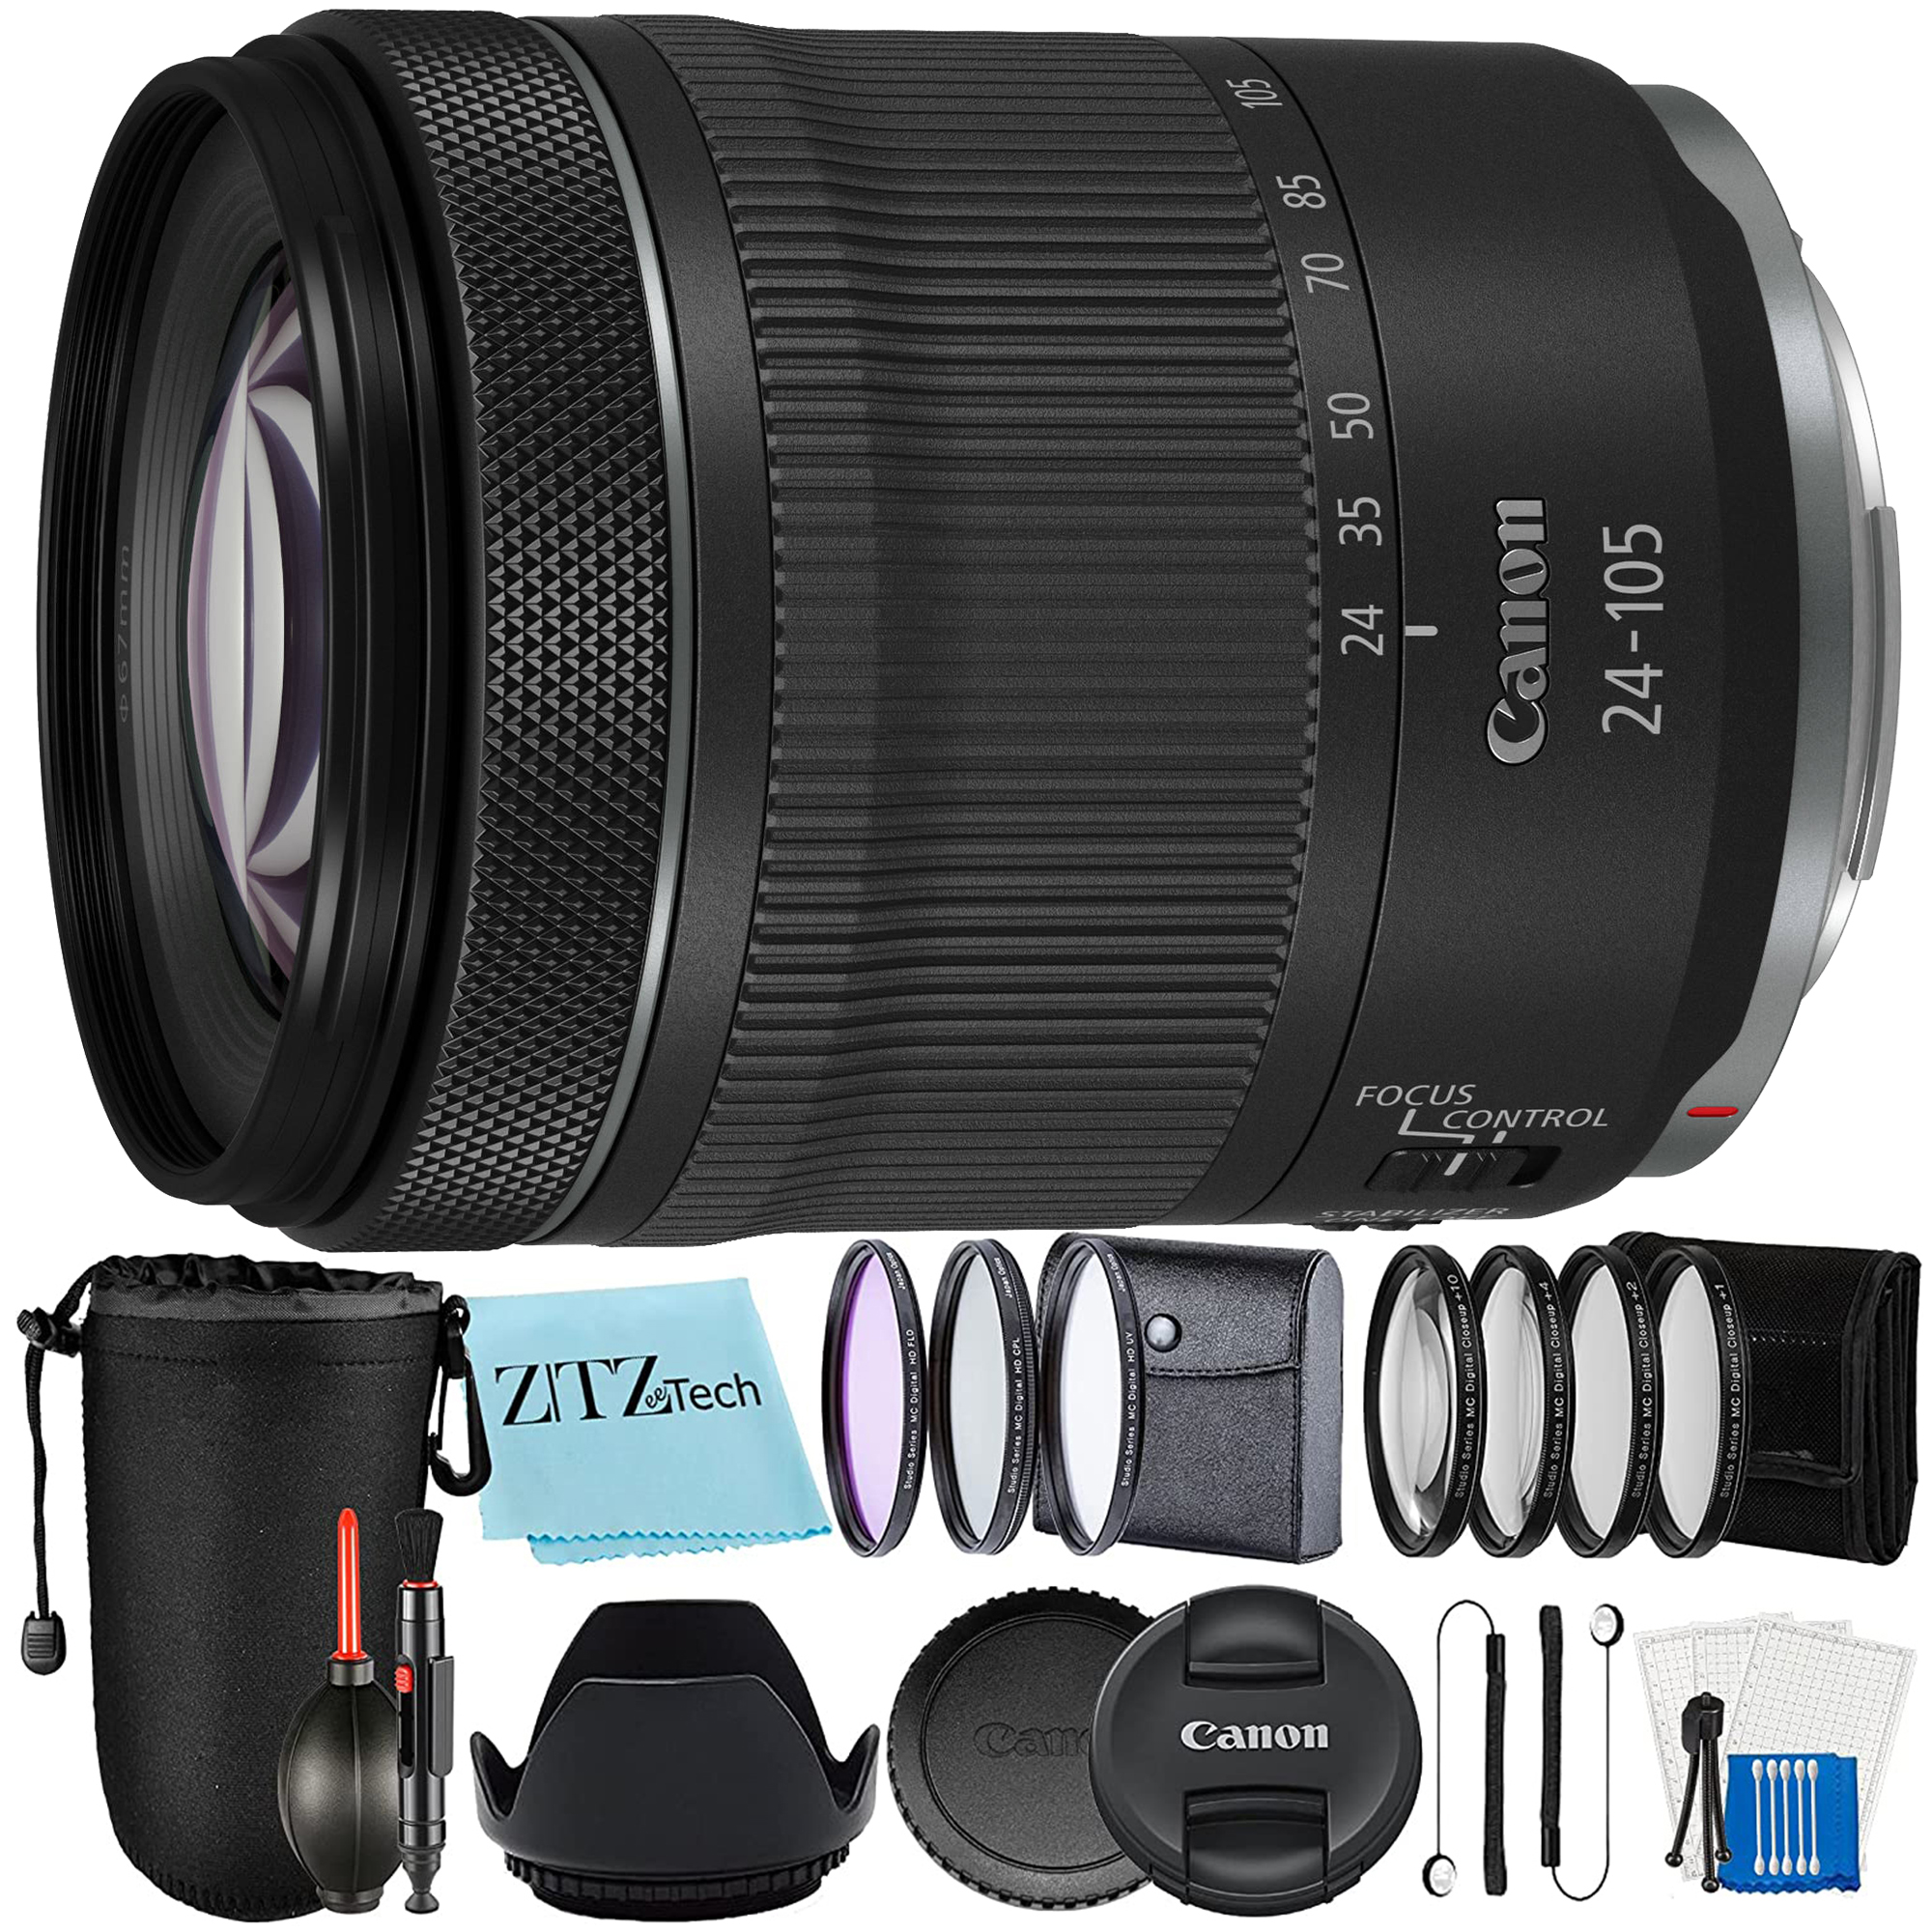 Canon RF 24-105mm f/4-7.1 IS STM Lens + Zeetech Accessory Bundle Package Include: Lens Pouch + Cleaning Pen + Marco Close Up Kit + Filter Kit (UV, CPL, FLD)